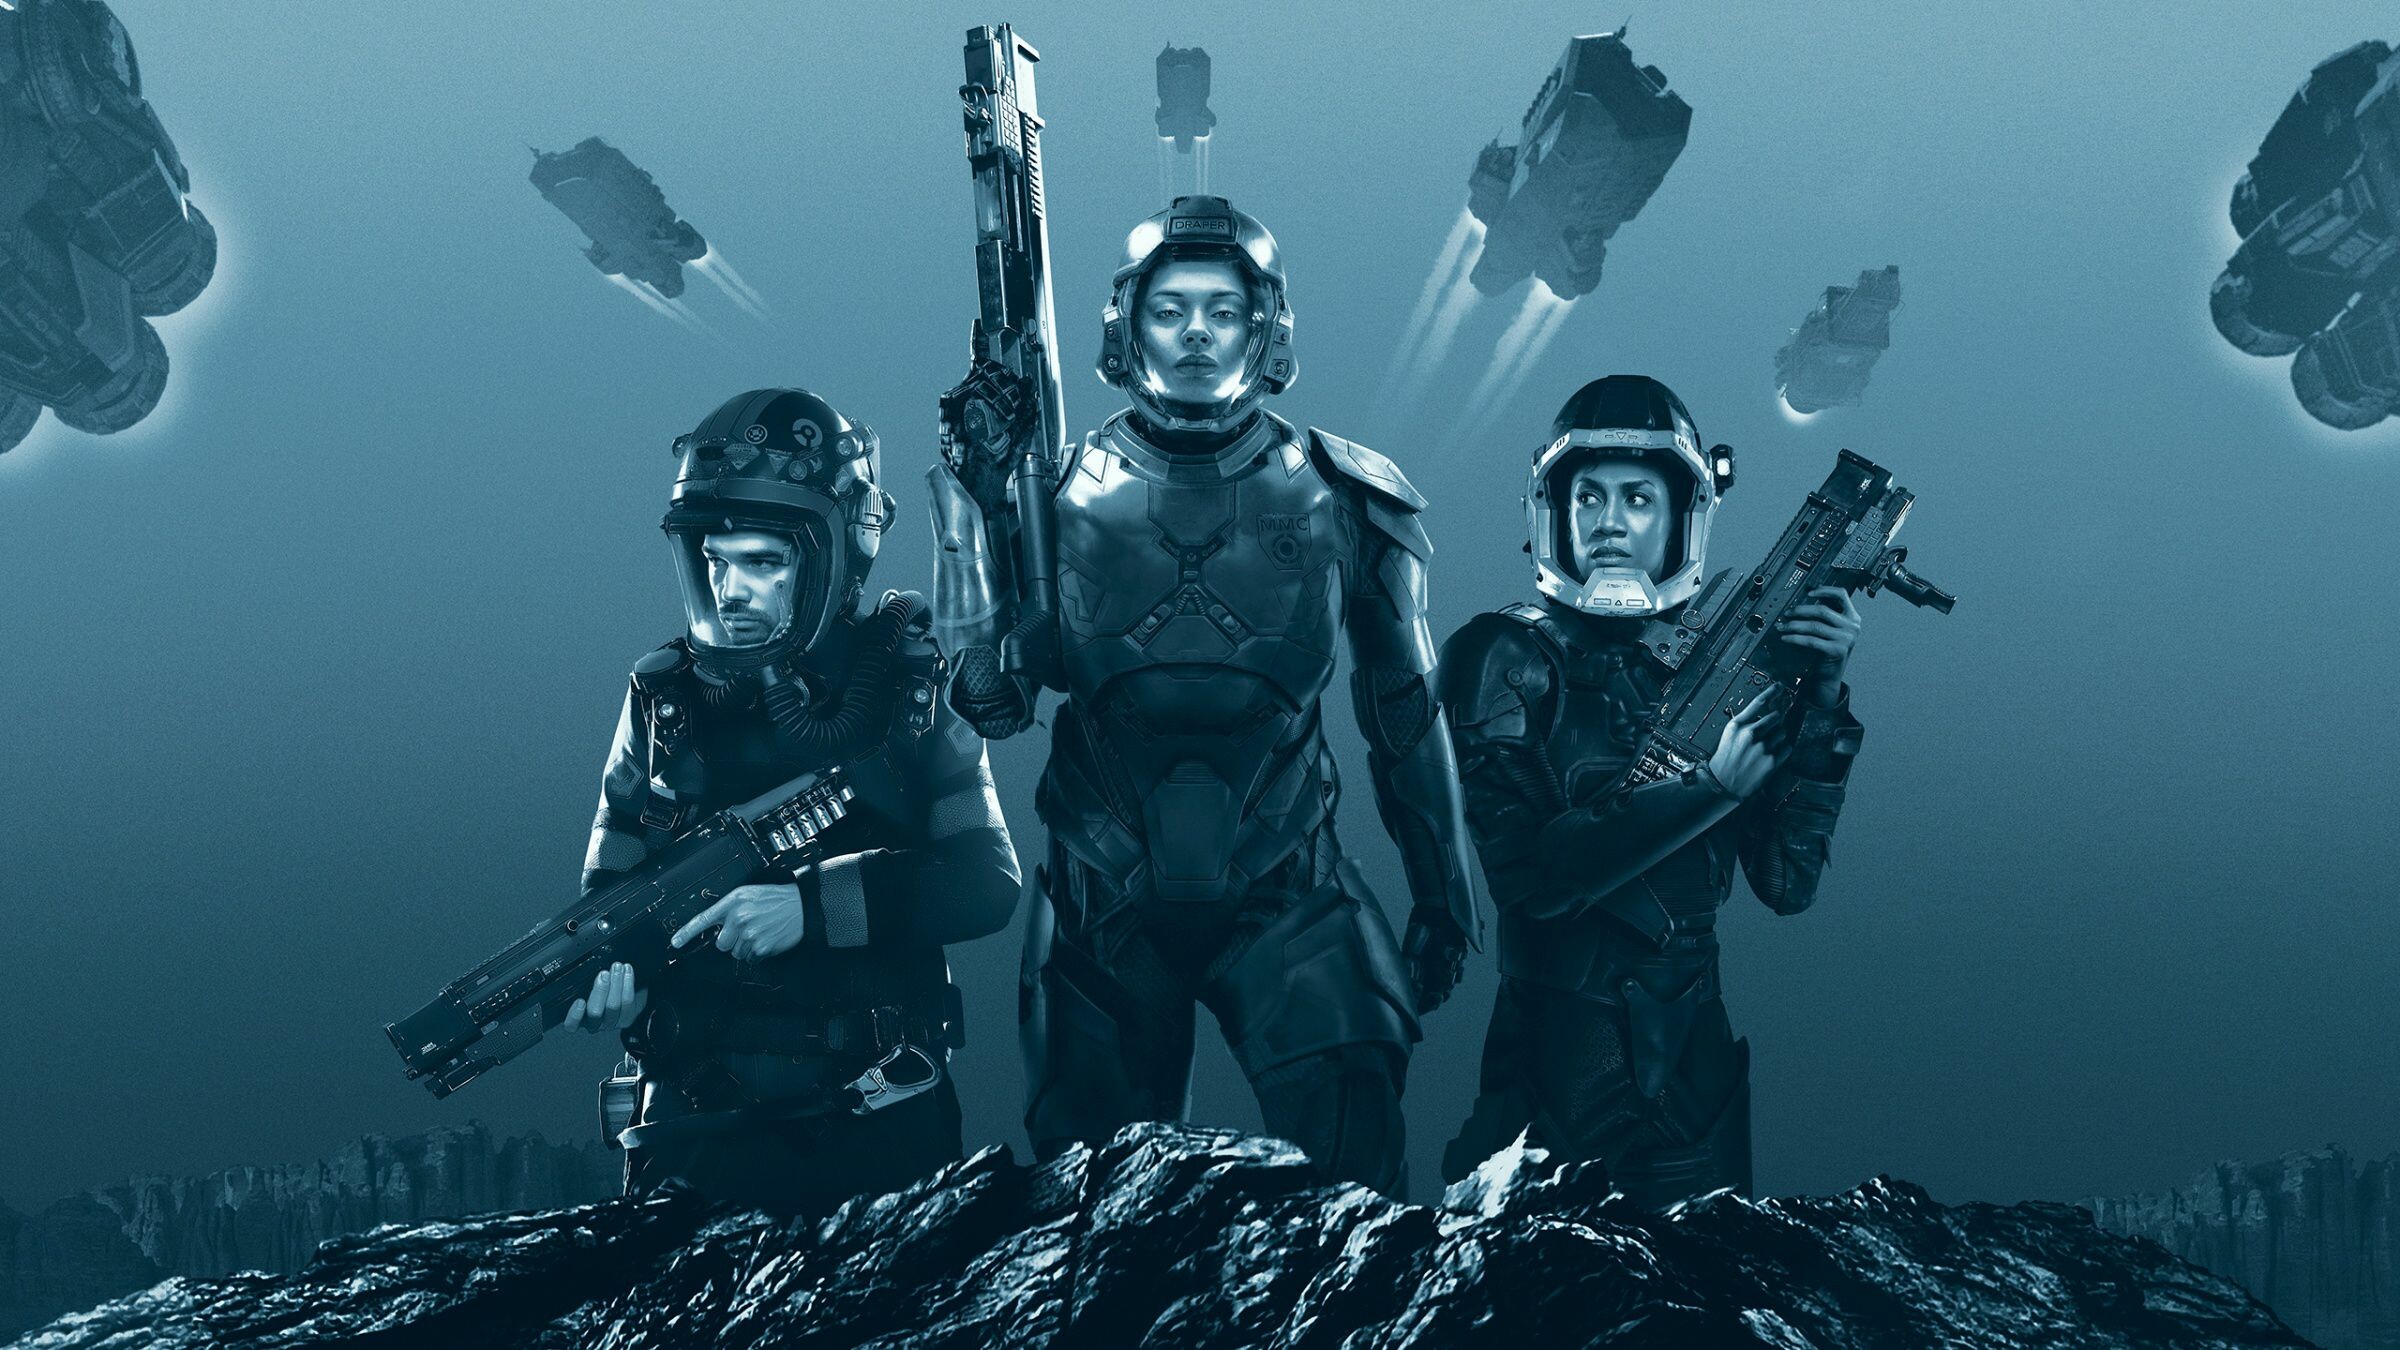 The Expanse: TV show, Developed by Mark Fergus and Hawk Ostby for the Syfy network. 2400x1350 HD Background.